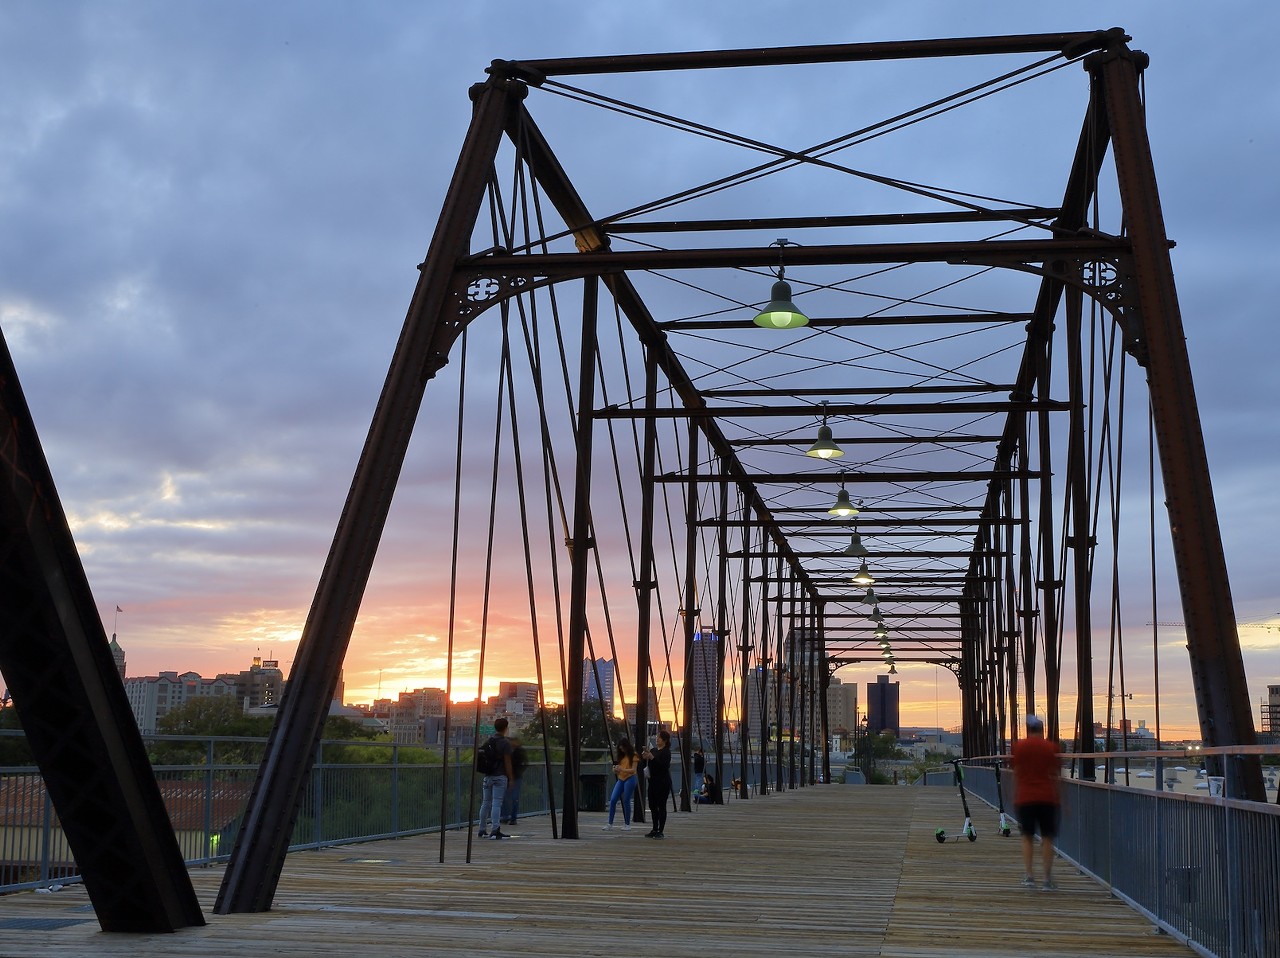 Watch the sunset from Hays St. Bridge
803 N. Cherry St.
The Hays St. Bridge is a prime spot for yoga and photoshoots for good reason. Take advantage of this gorgeous view of the SA skyline at dusk.